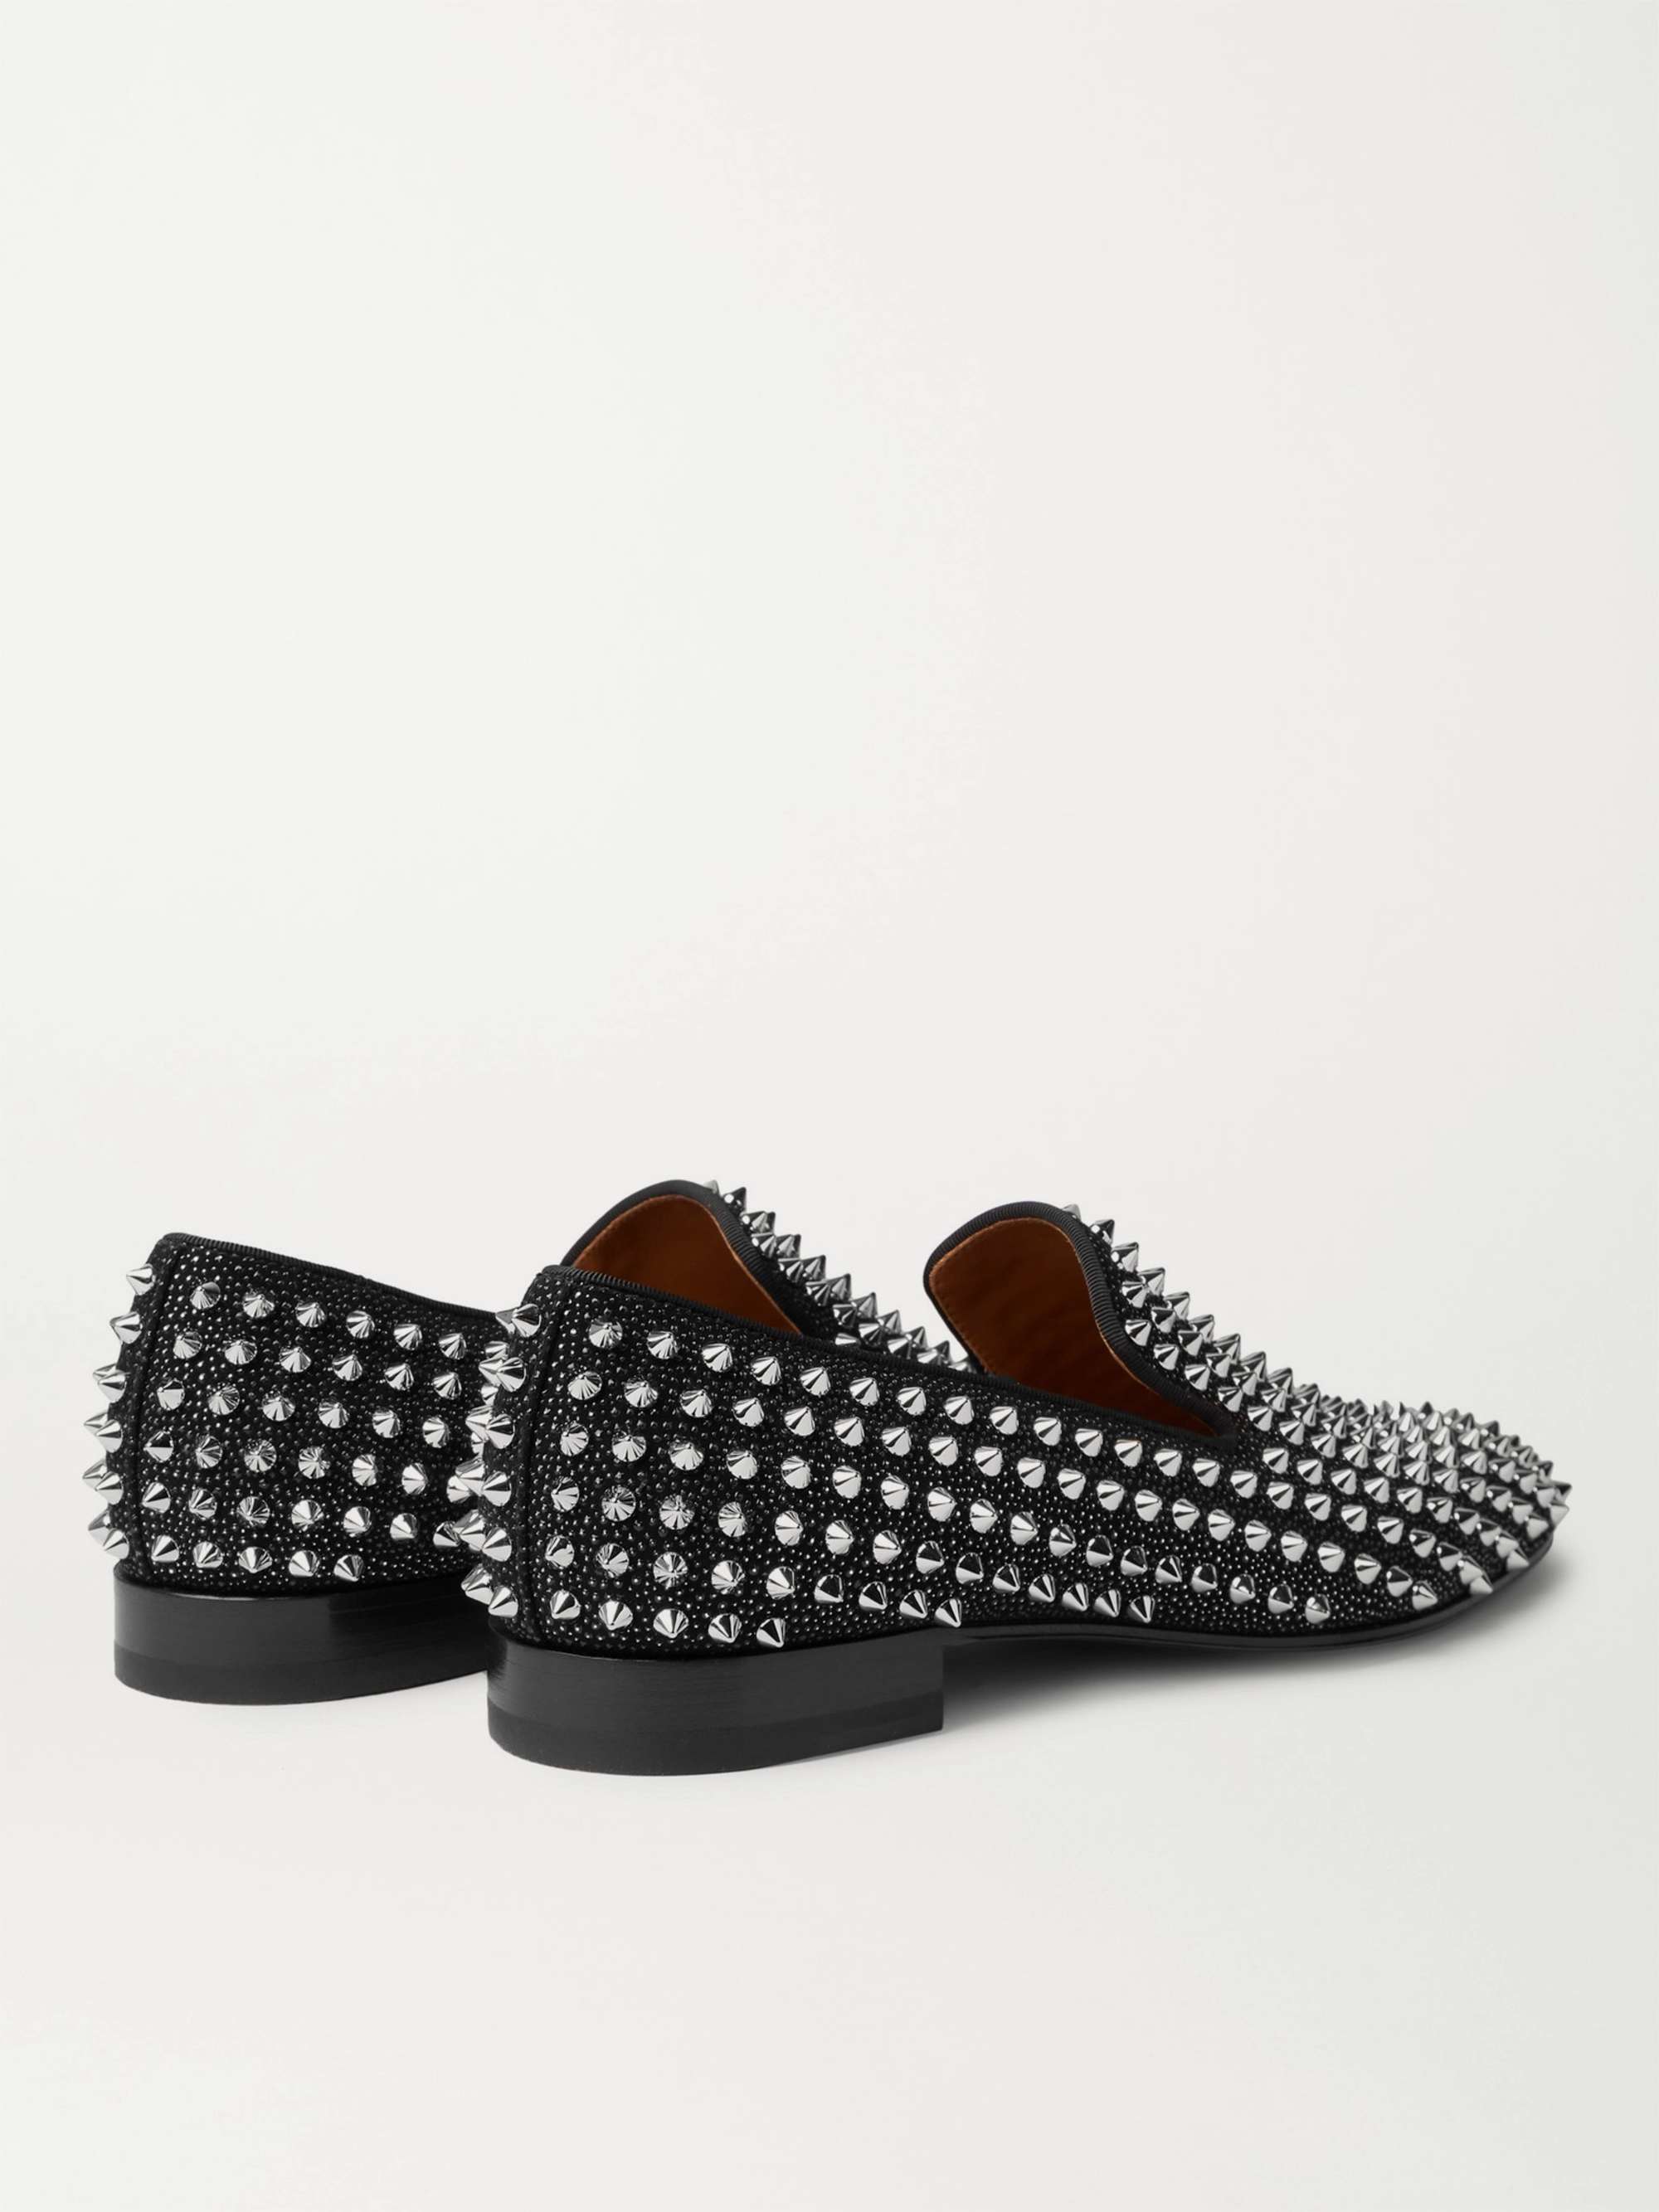 CHRISTIAN LOUBOUTIN Dandelion Spiked Suede Loafers